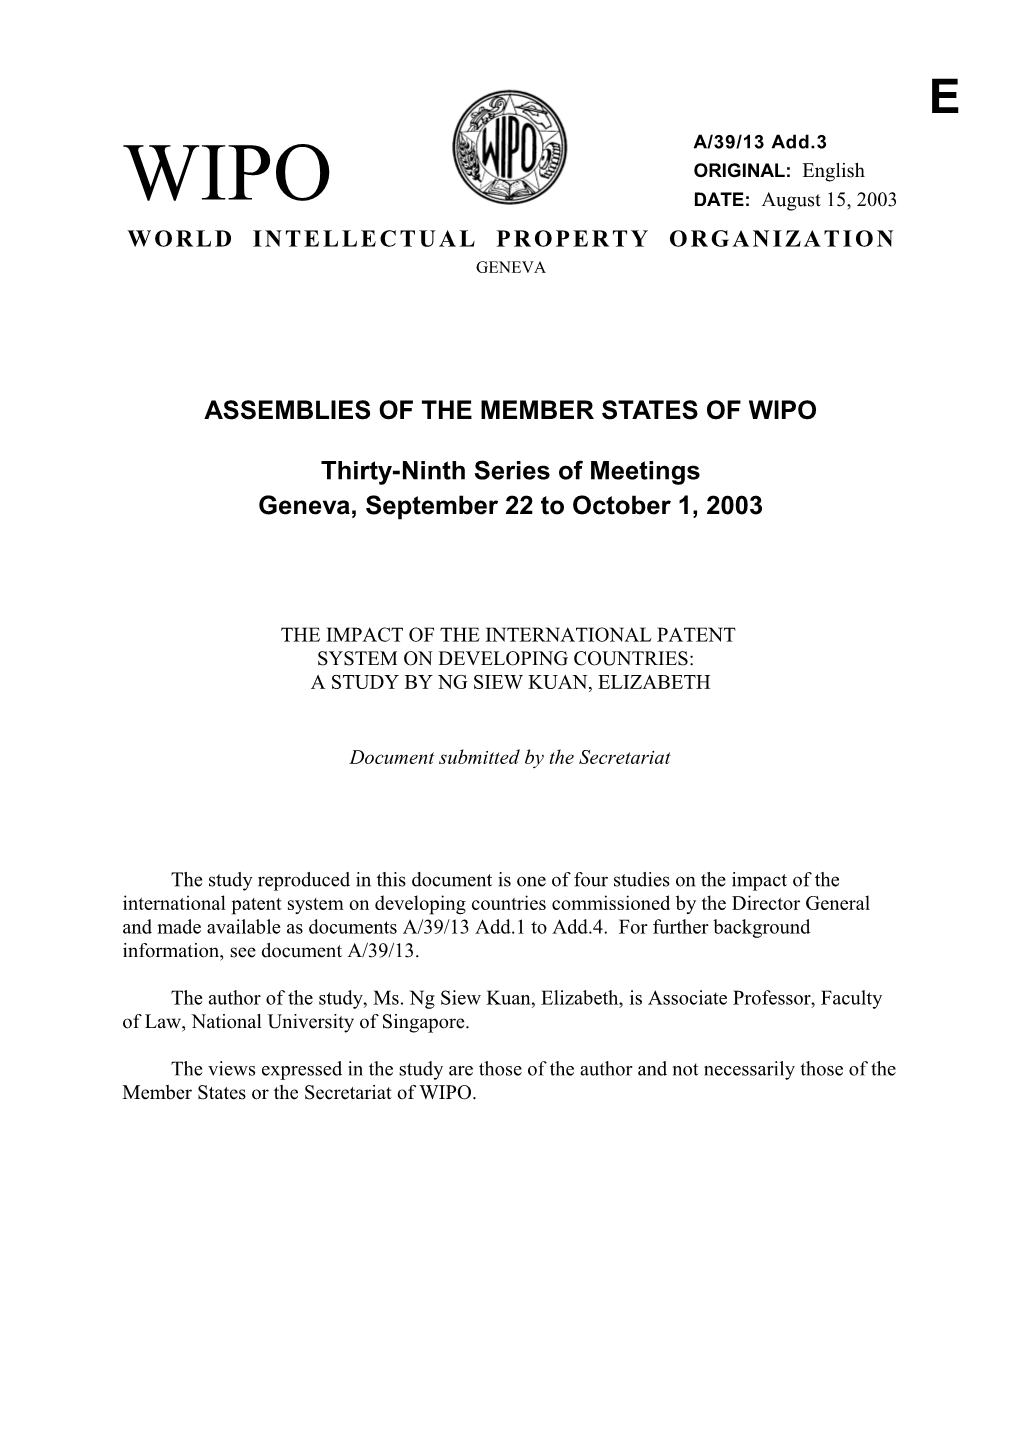 A/39/13 ADD.3: the Impact of the International Patent System on Developing Countries: A